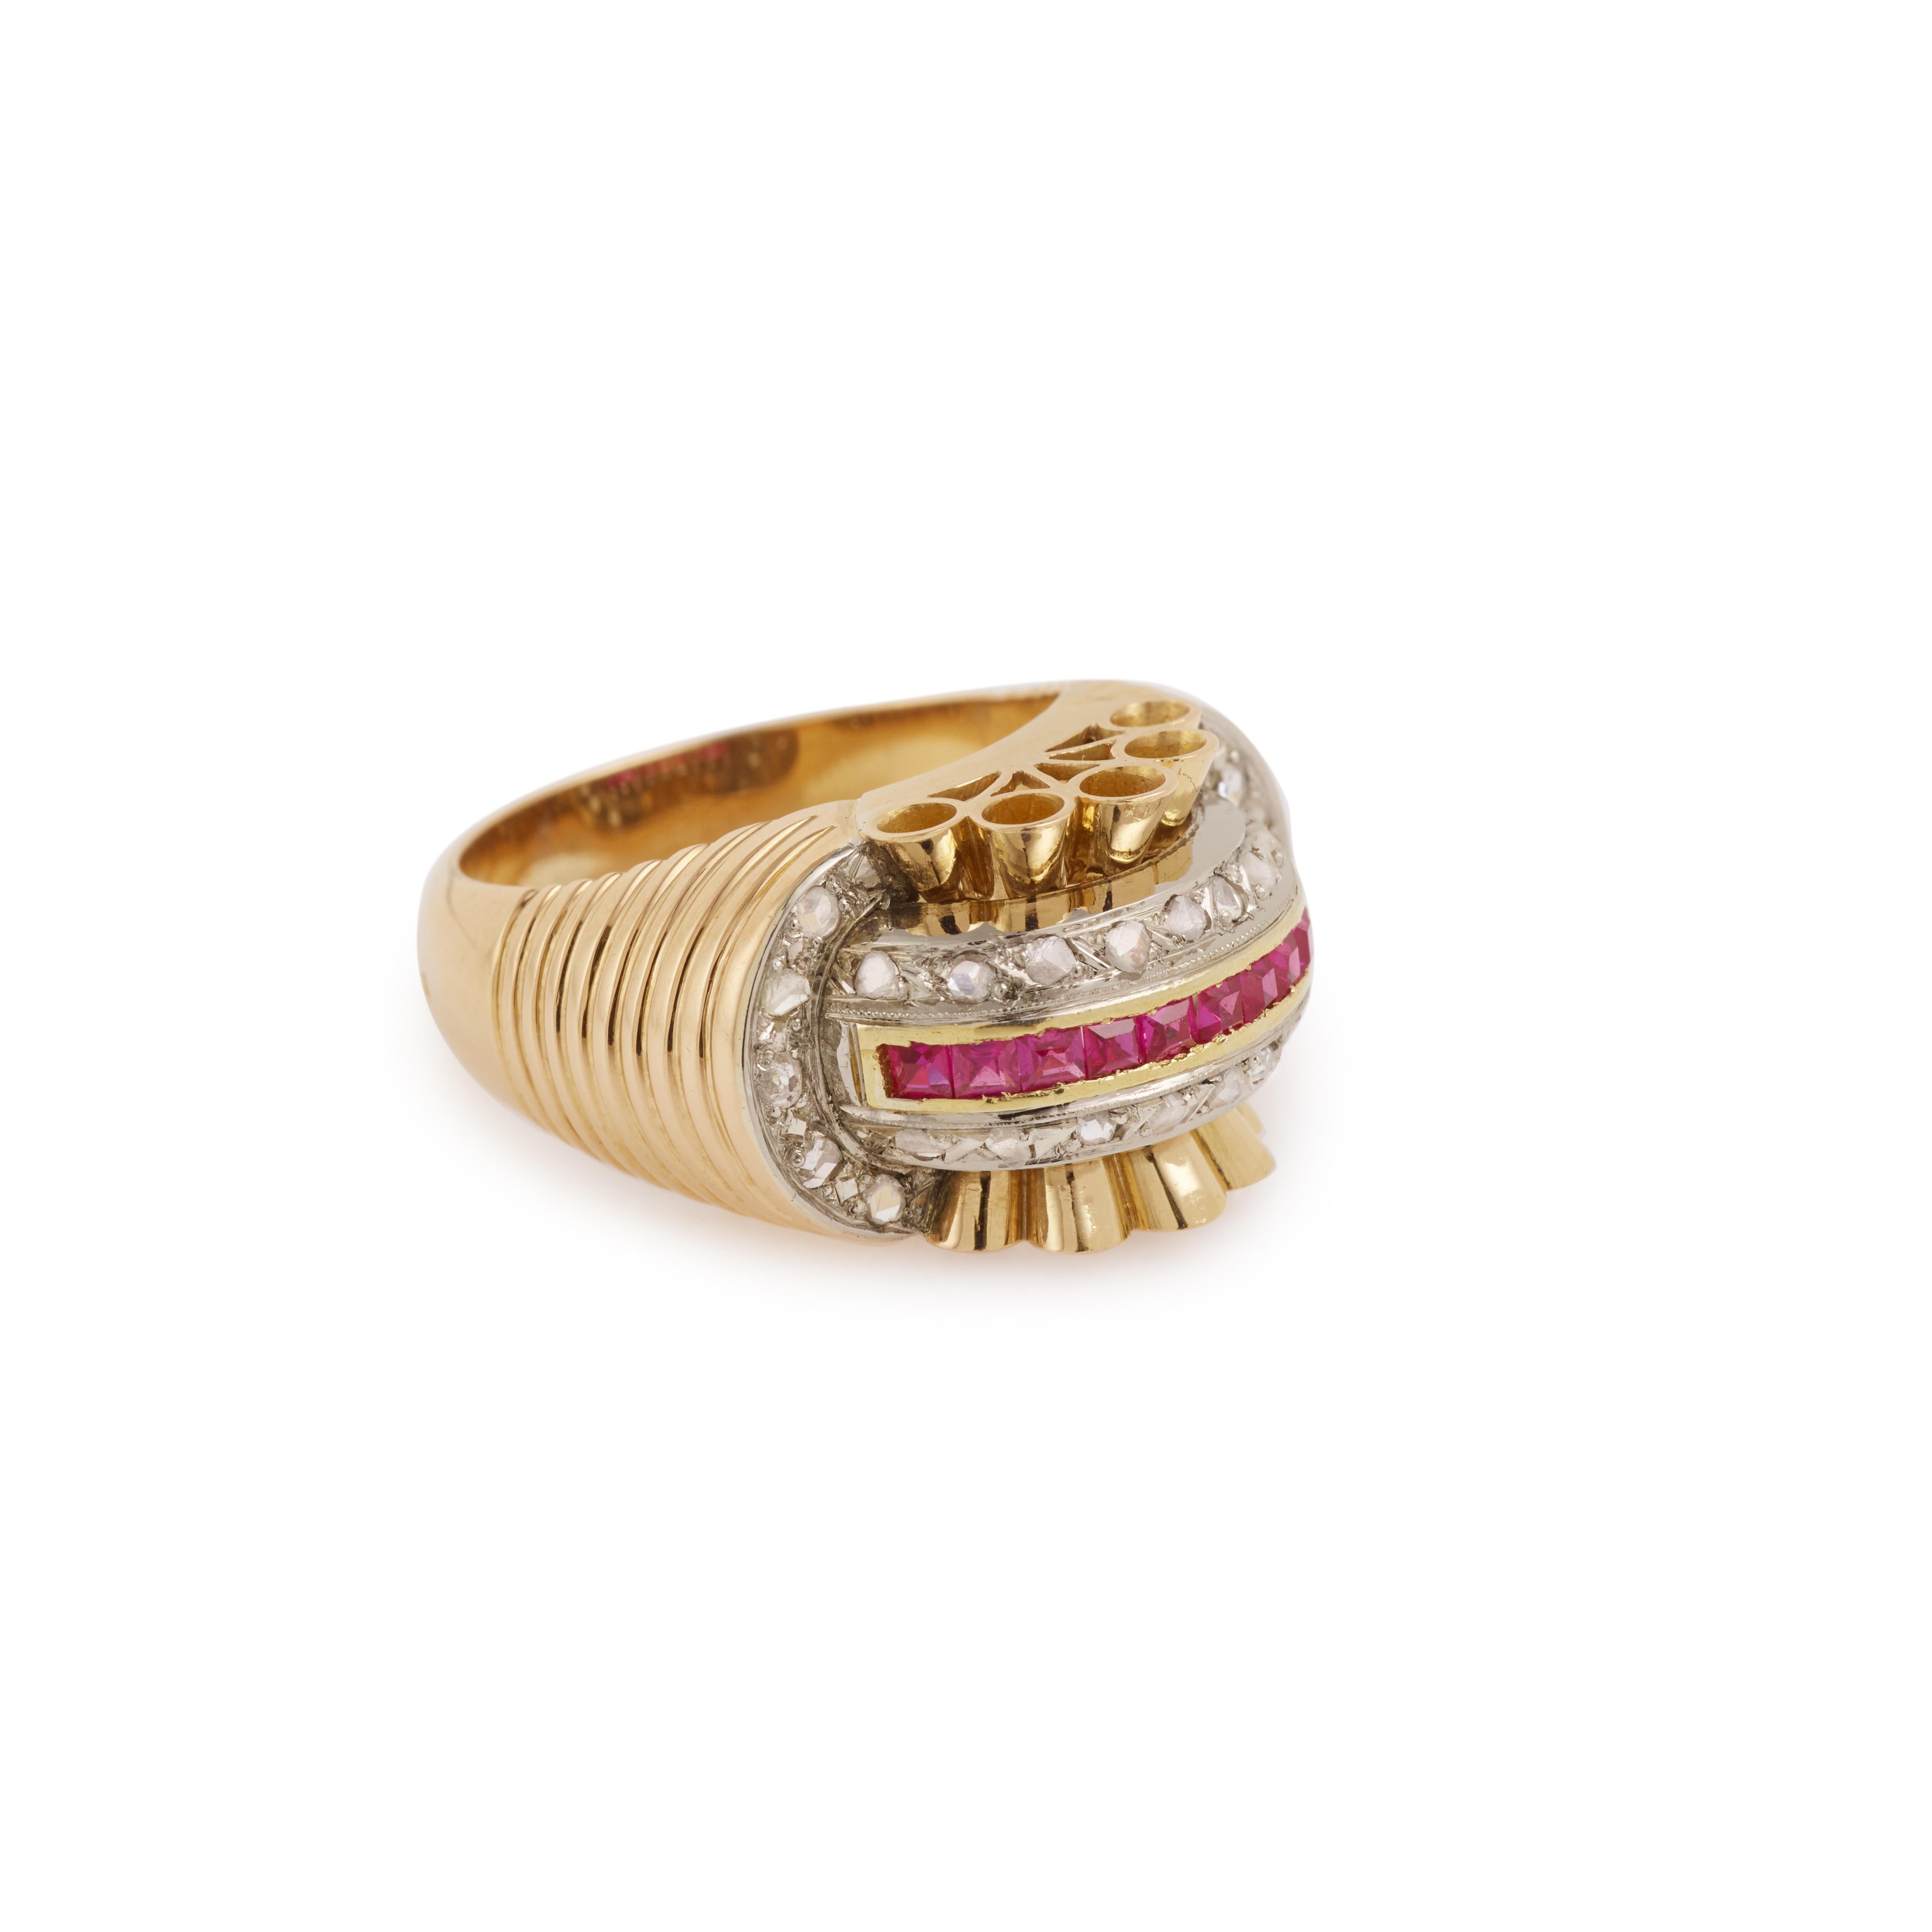 Lovely 1940's Pont ring in rose gold and platinum paved with diamonds and synthetic rubies (characteristic of this period).

Total weight of synthetic rubies: 0.11 carats.

Total diamond weight: approximately 0.30 carats

Finger size: 55 (US size: